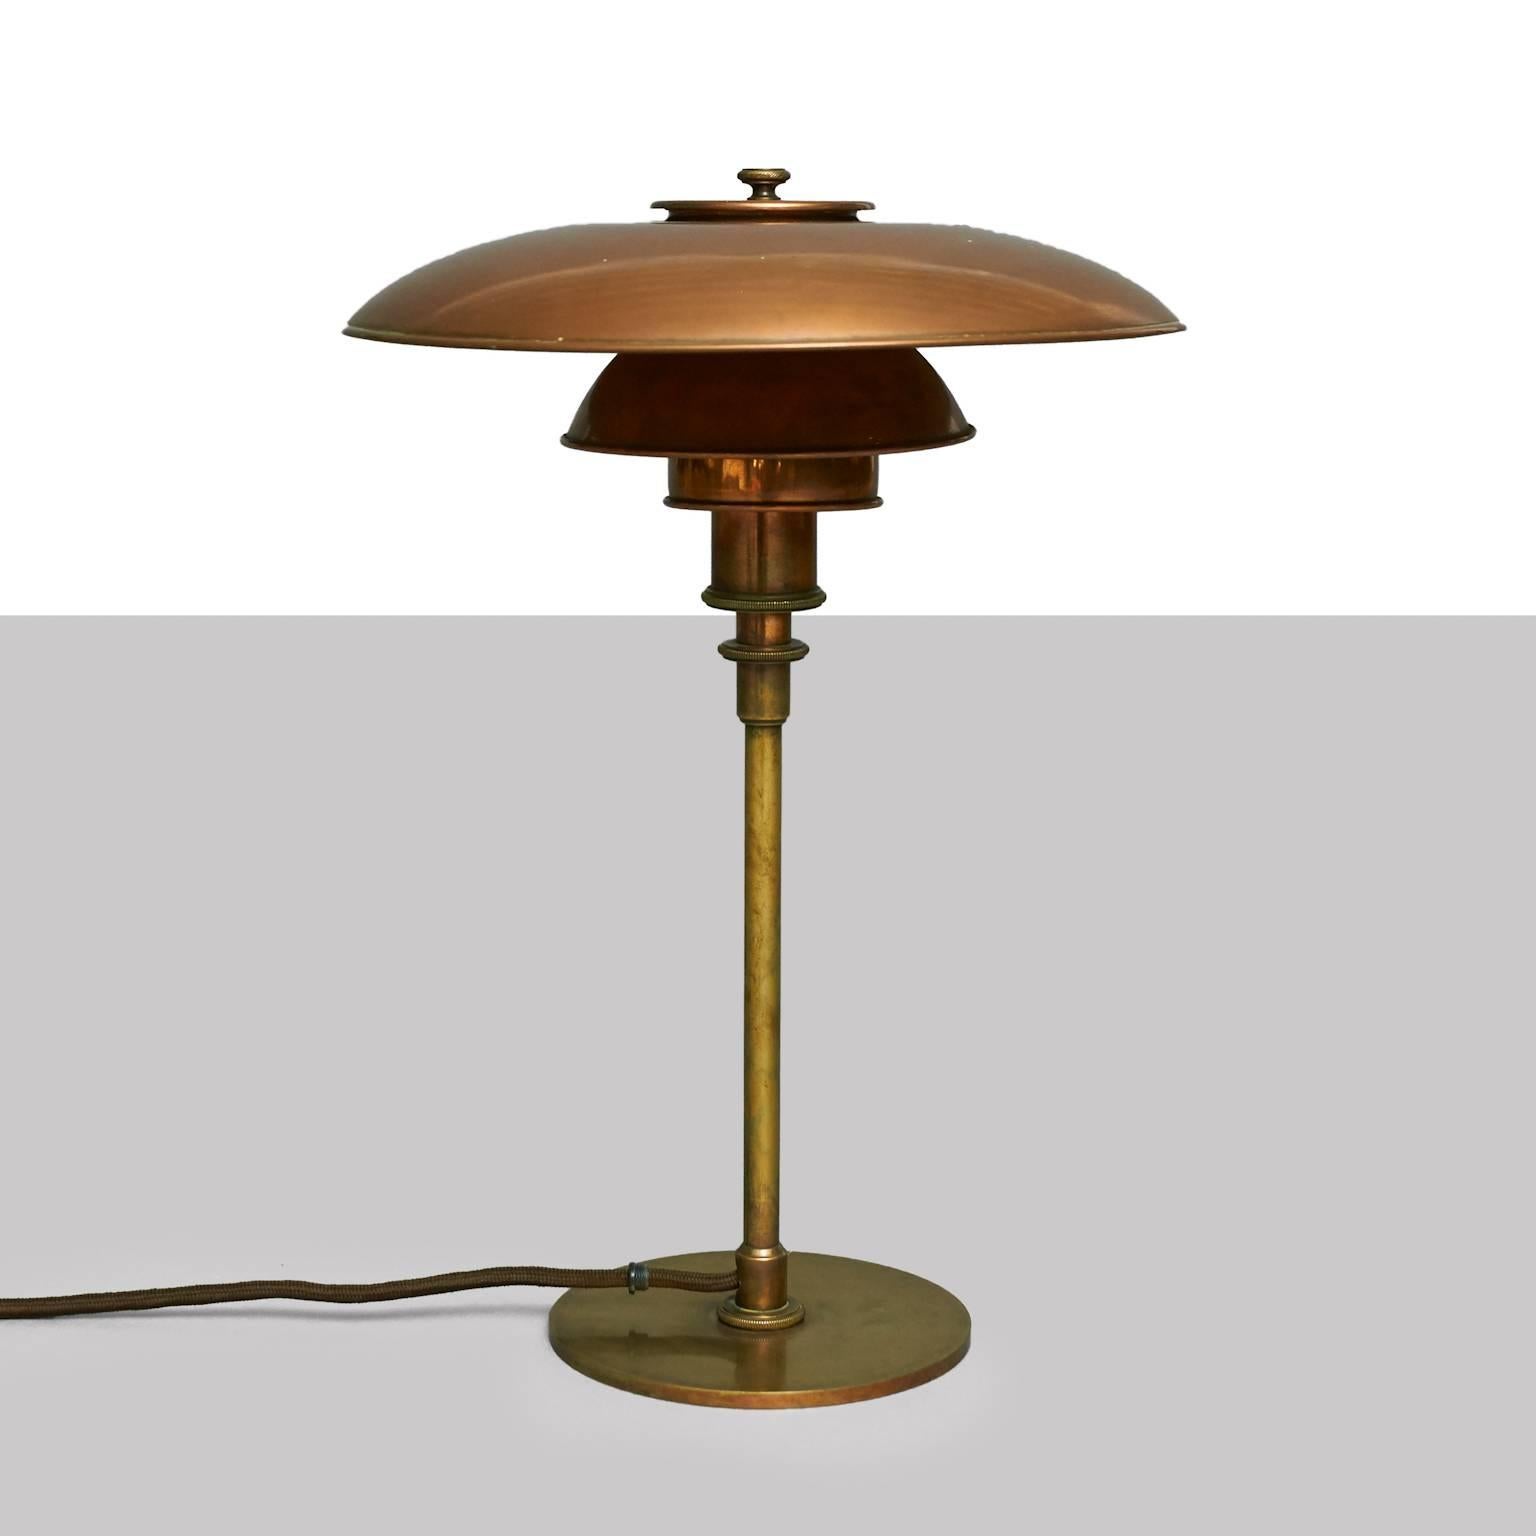 A table lamp by Poul Henningsen with browned brass frame, socket cover and top, mounted with 3/2 patinated copper shade set. No switch on the frame. Stamped 'Pat. Appl.' (highly valued to PH collectors). Early model produced by Louis Poulsen in